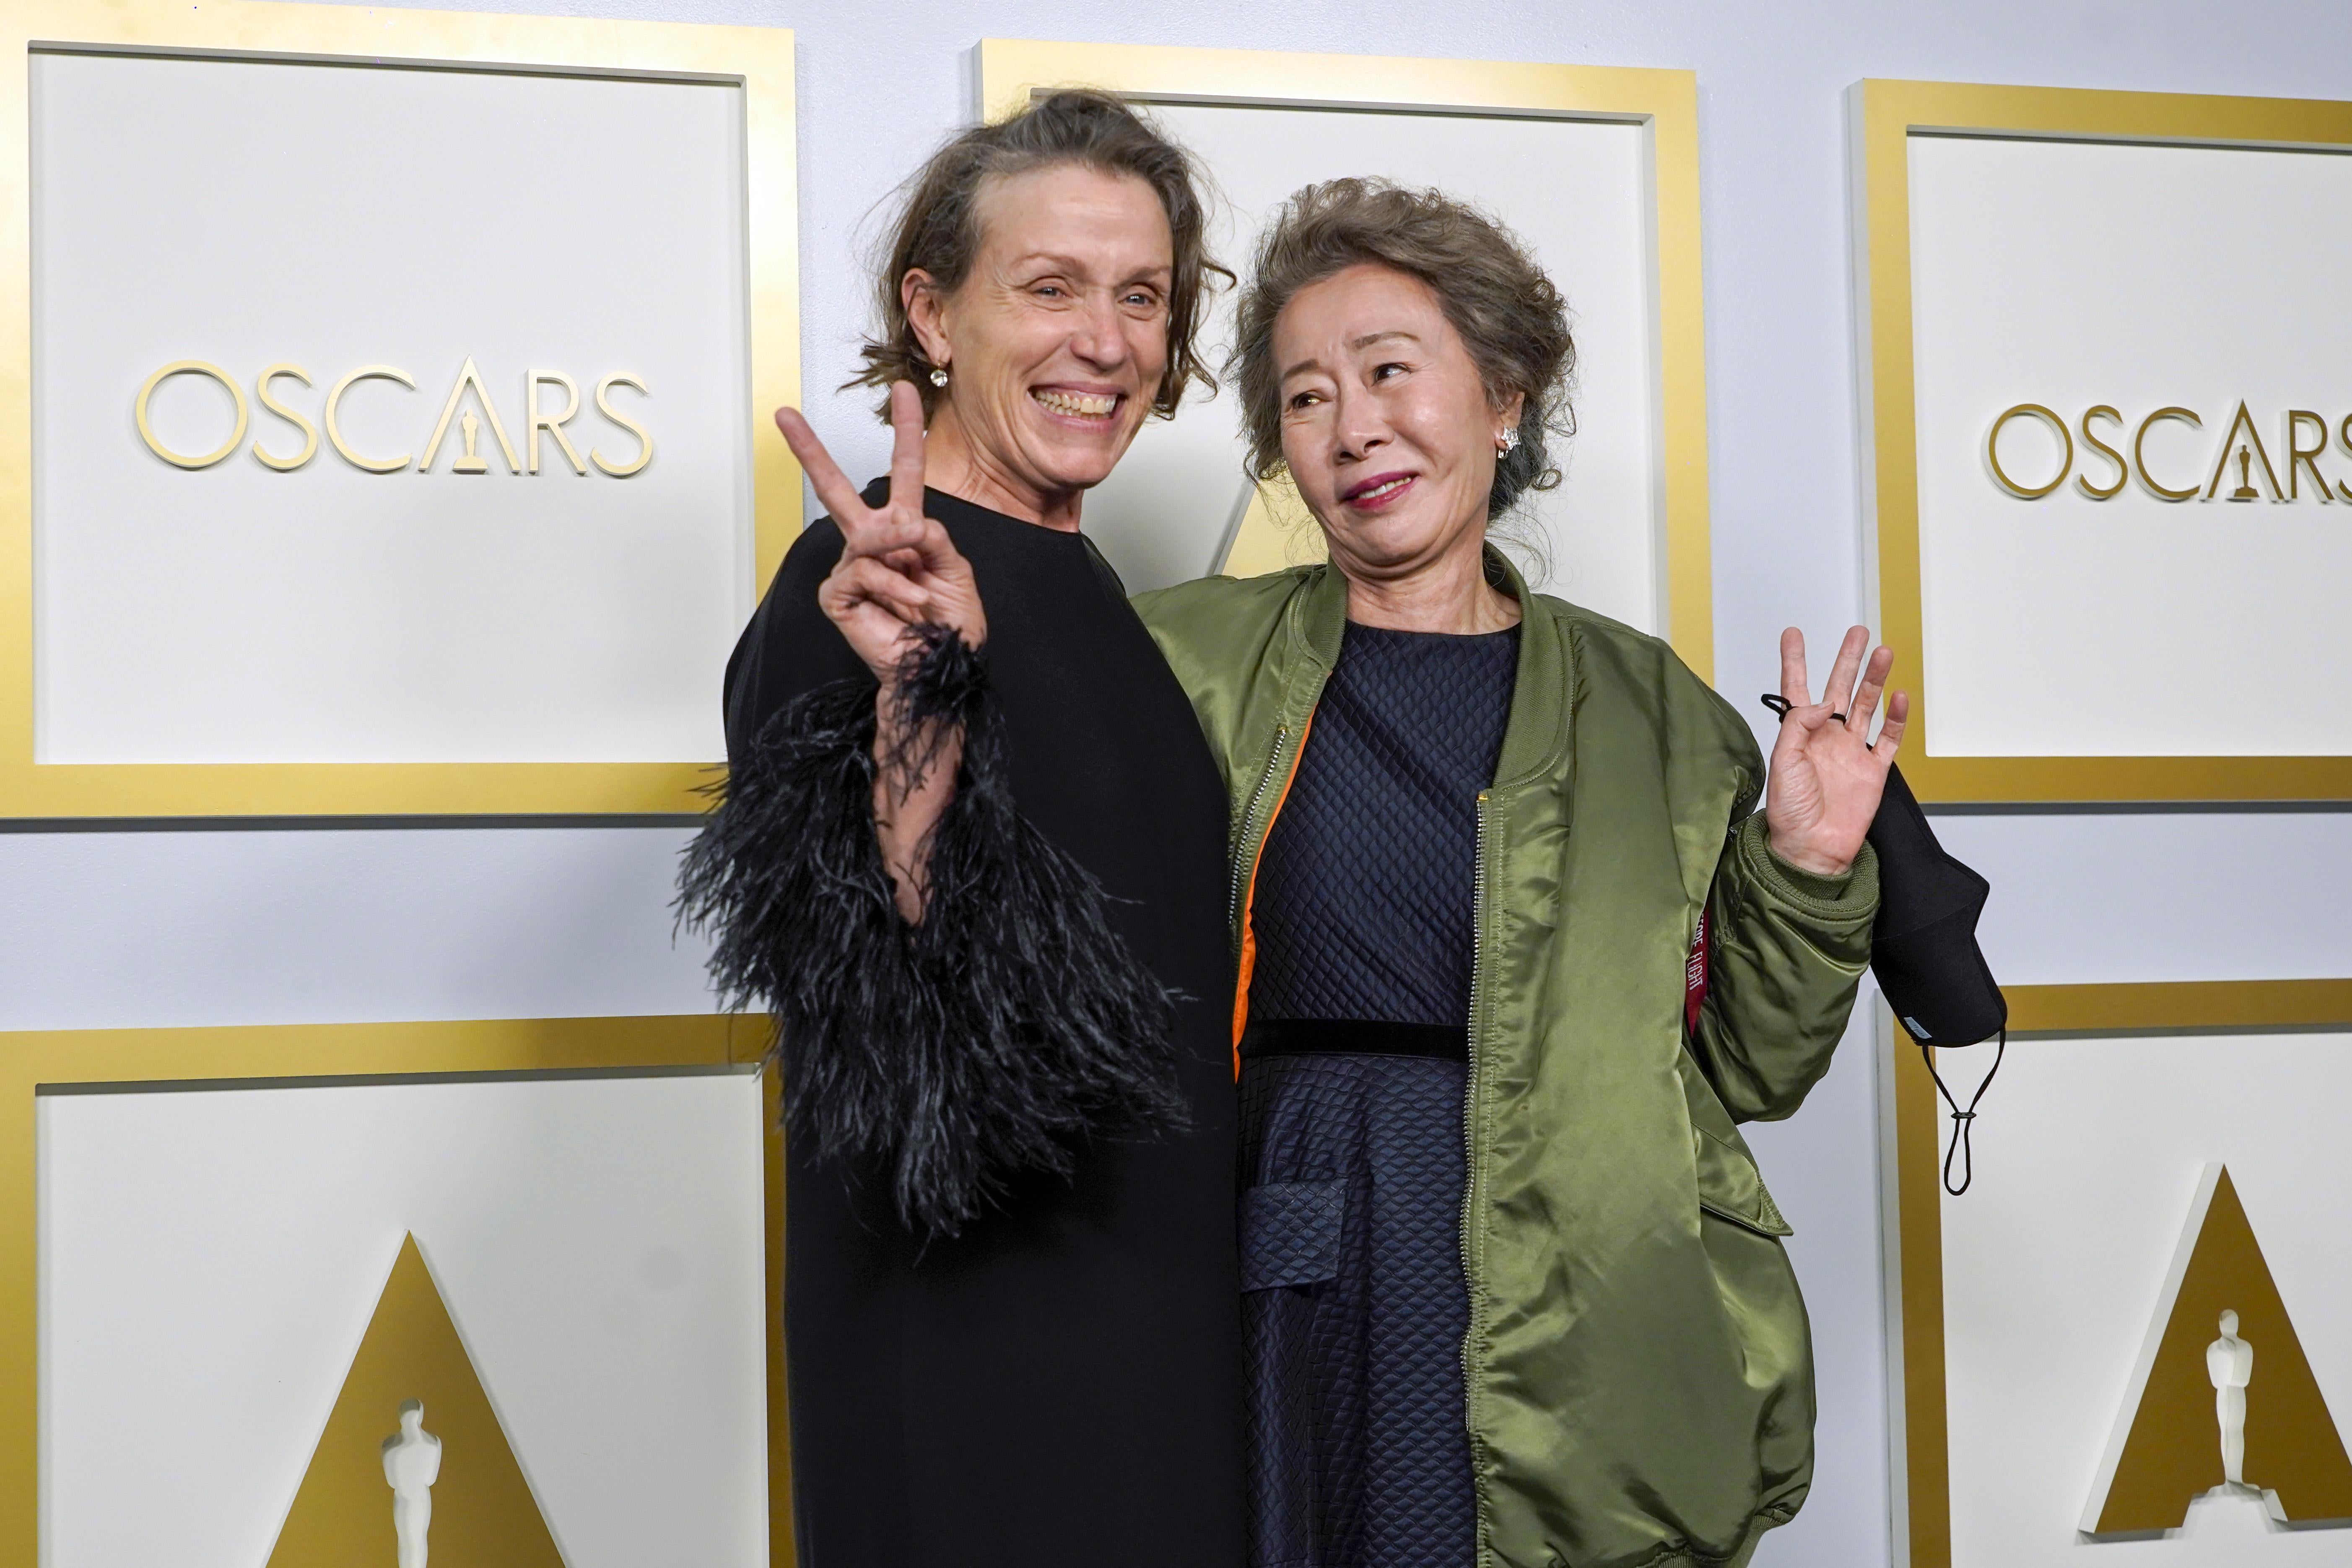 LOS ANGELES, CALIFORNIA - APRIL 25: (L-R) Frances McDormand, winner of Best Actress in a Leading Role for "Nomadland," and Yuh-Jung Youn, winner of Best Actress in a Supporting Role for "Minari," pose in the press room at the Oscars on Sunday, April 25, 2021, at Union Station in Los Angeles. (Photo by Chris Pizzello-Pool/Getty Images)